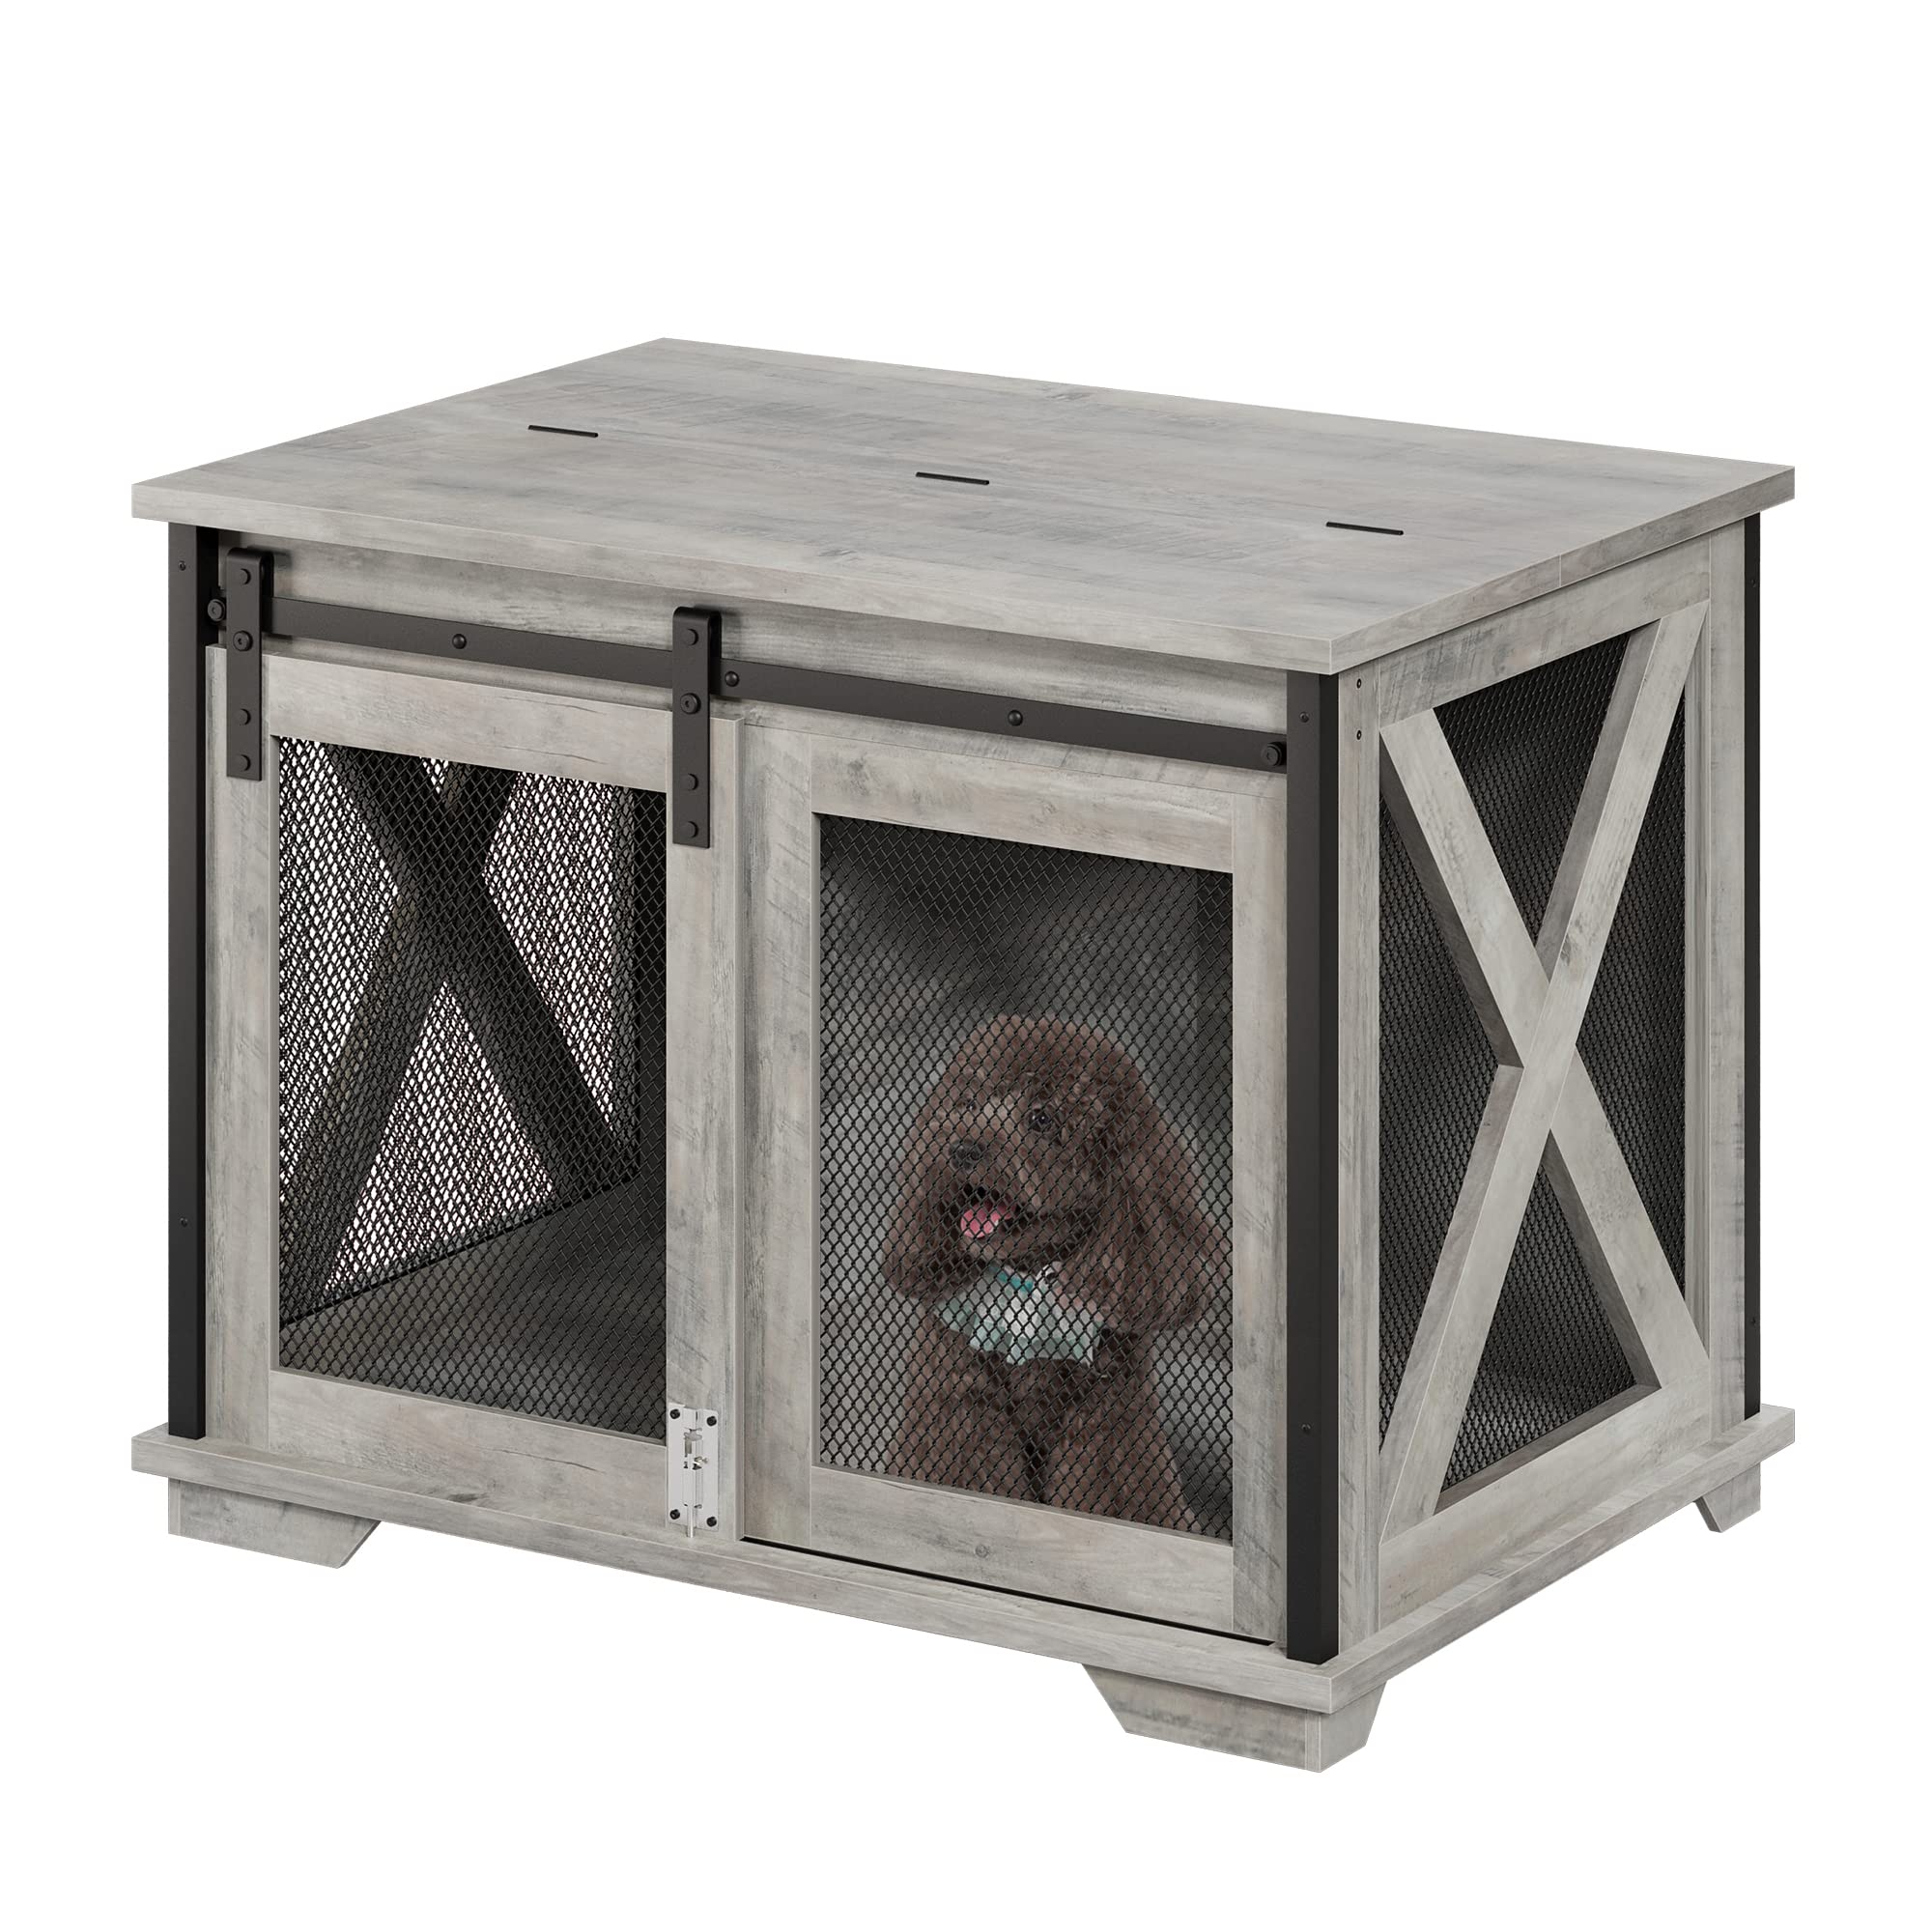 IDEALHOUSE 37' Dog Crate Furniture Side End Table with Flip Top and Movable Divider, Wooden Dog Crate Table Large, Style Dog Kennel Side End Table